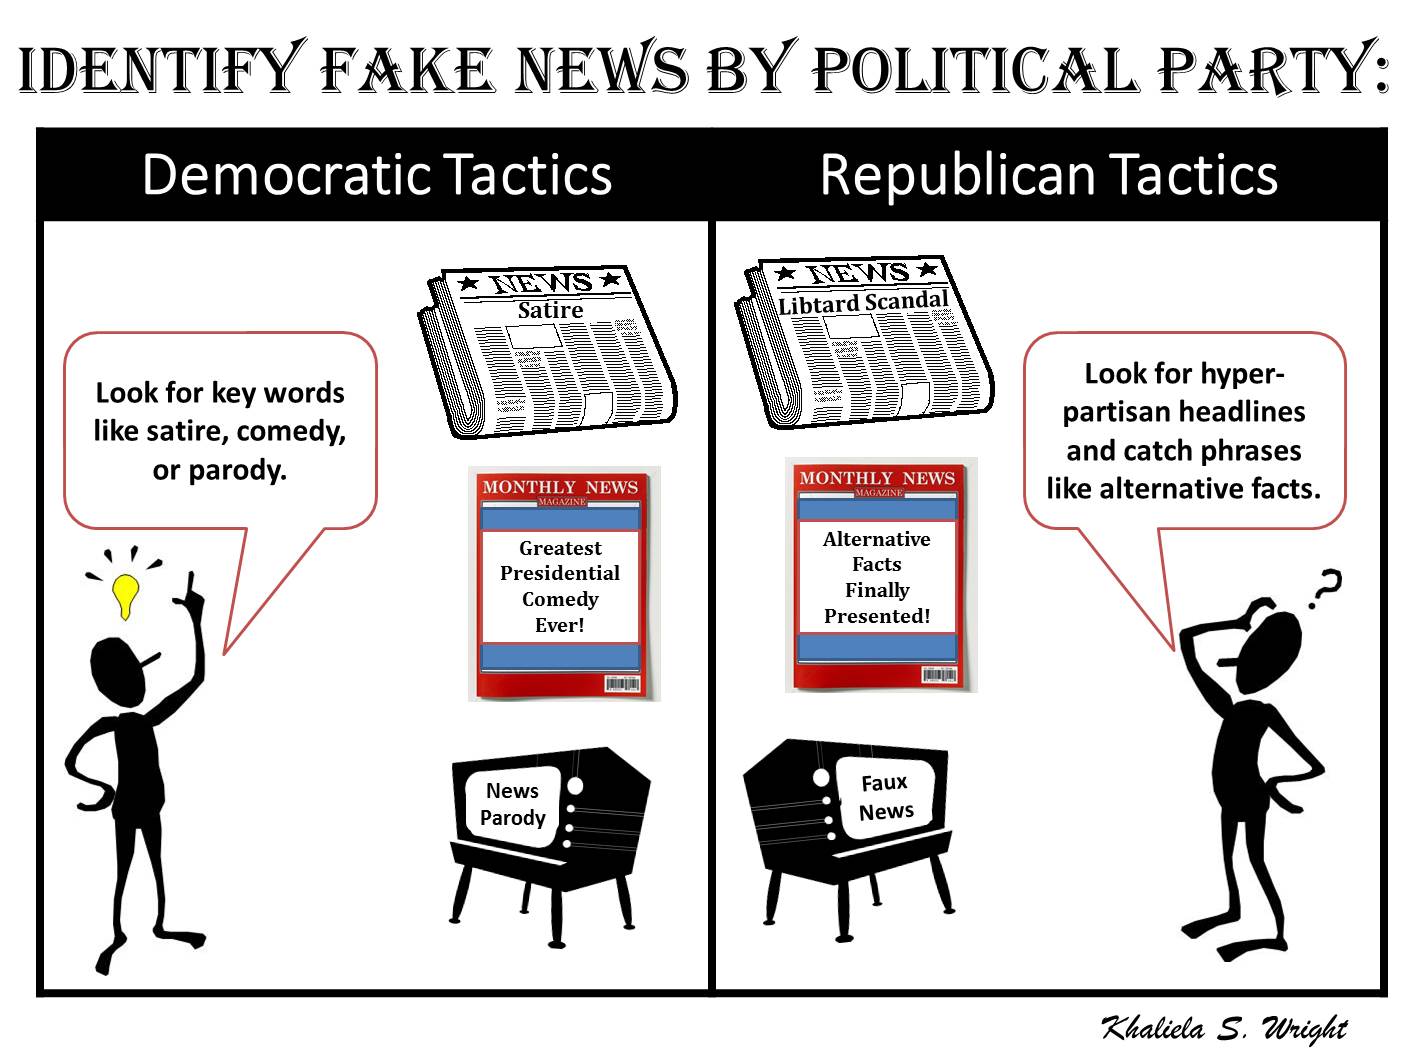 "Fake News By Political Party."